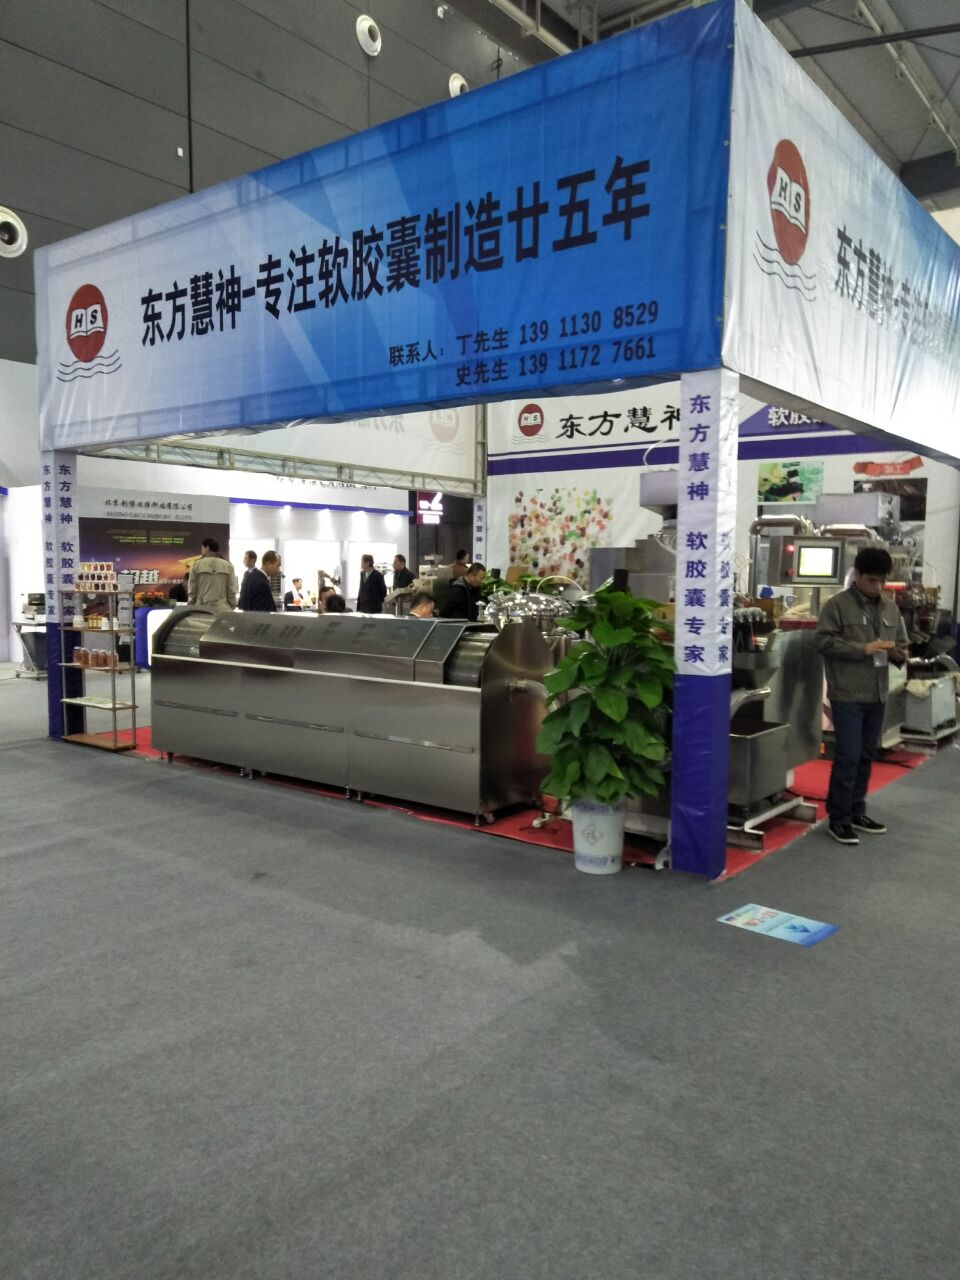 We took part in the 54th CIPM exhibition in Changsha